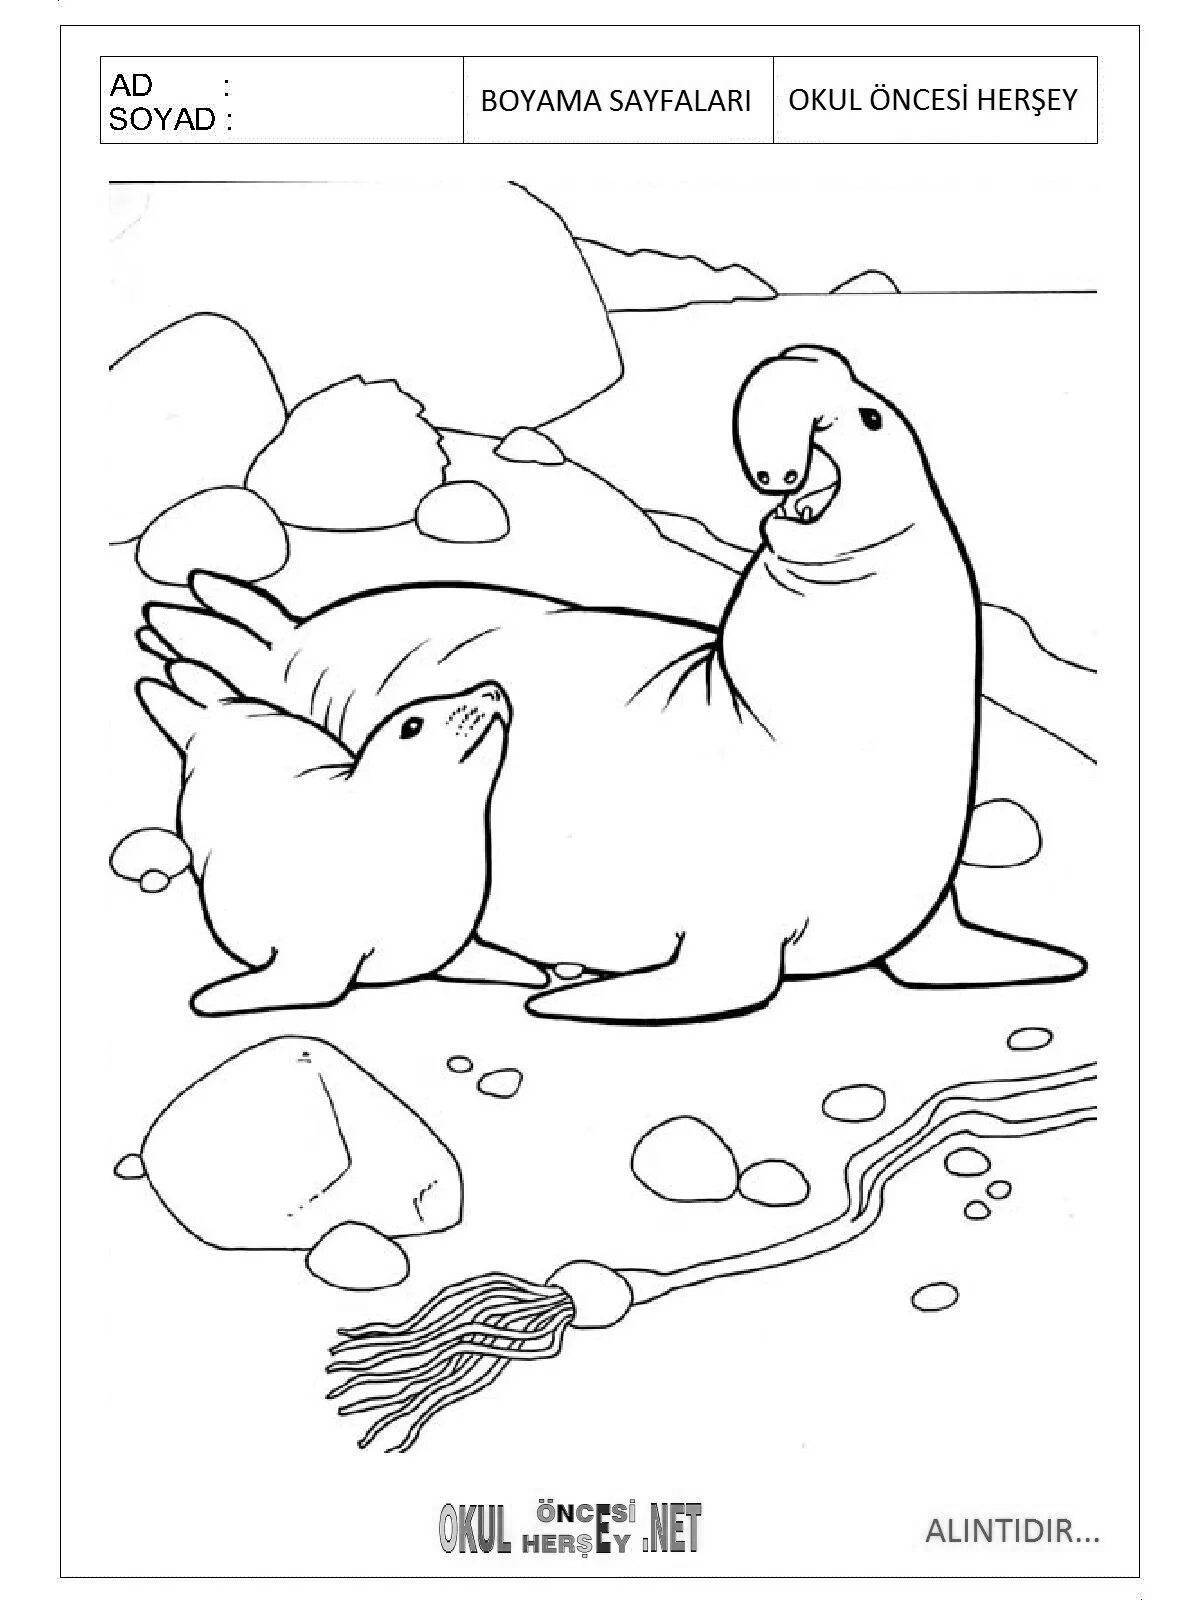 Antarctic playful coloring for children 6-7 years old